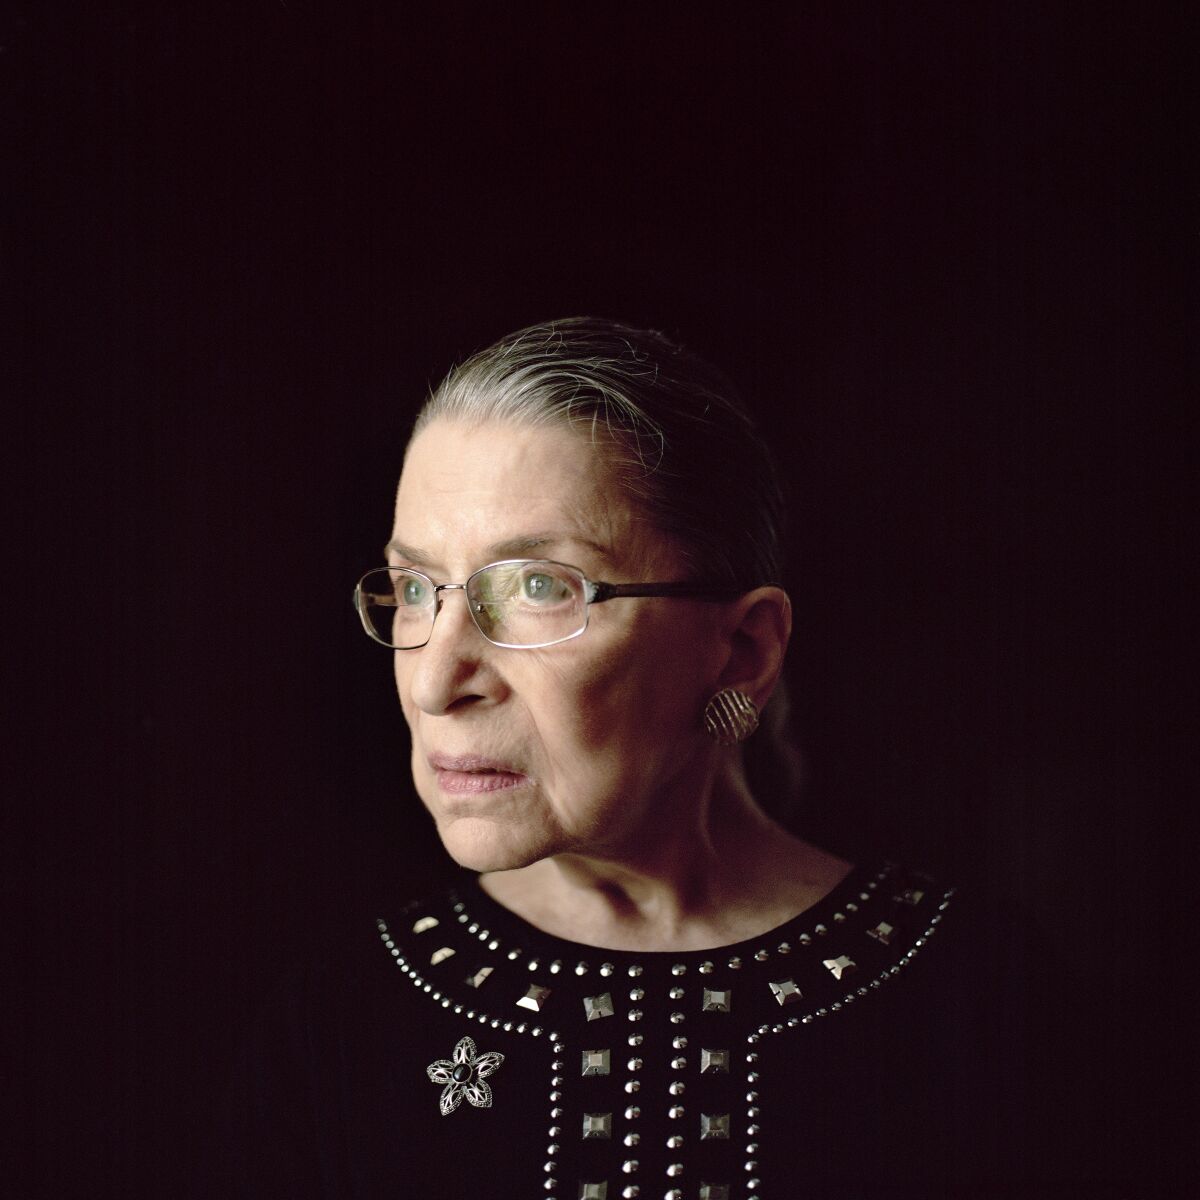 Justice Ruth Bader Ginsburg, in her chambers at the Supreme Court in Washington, August 23, 2013. 